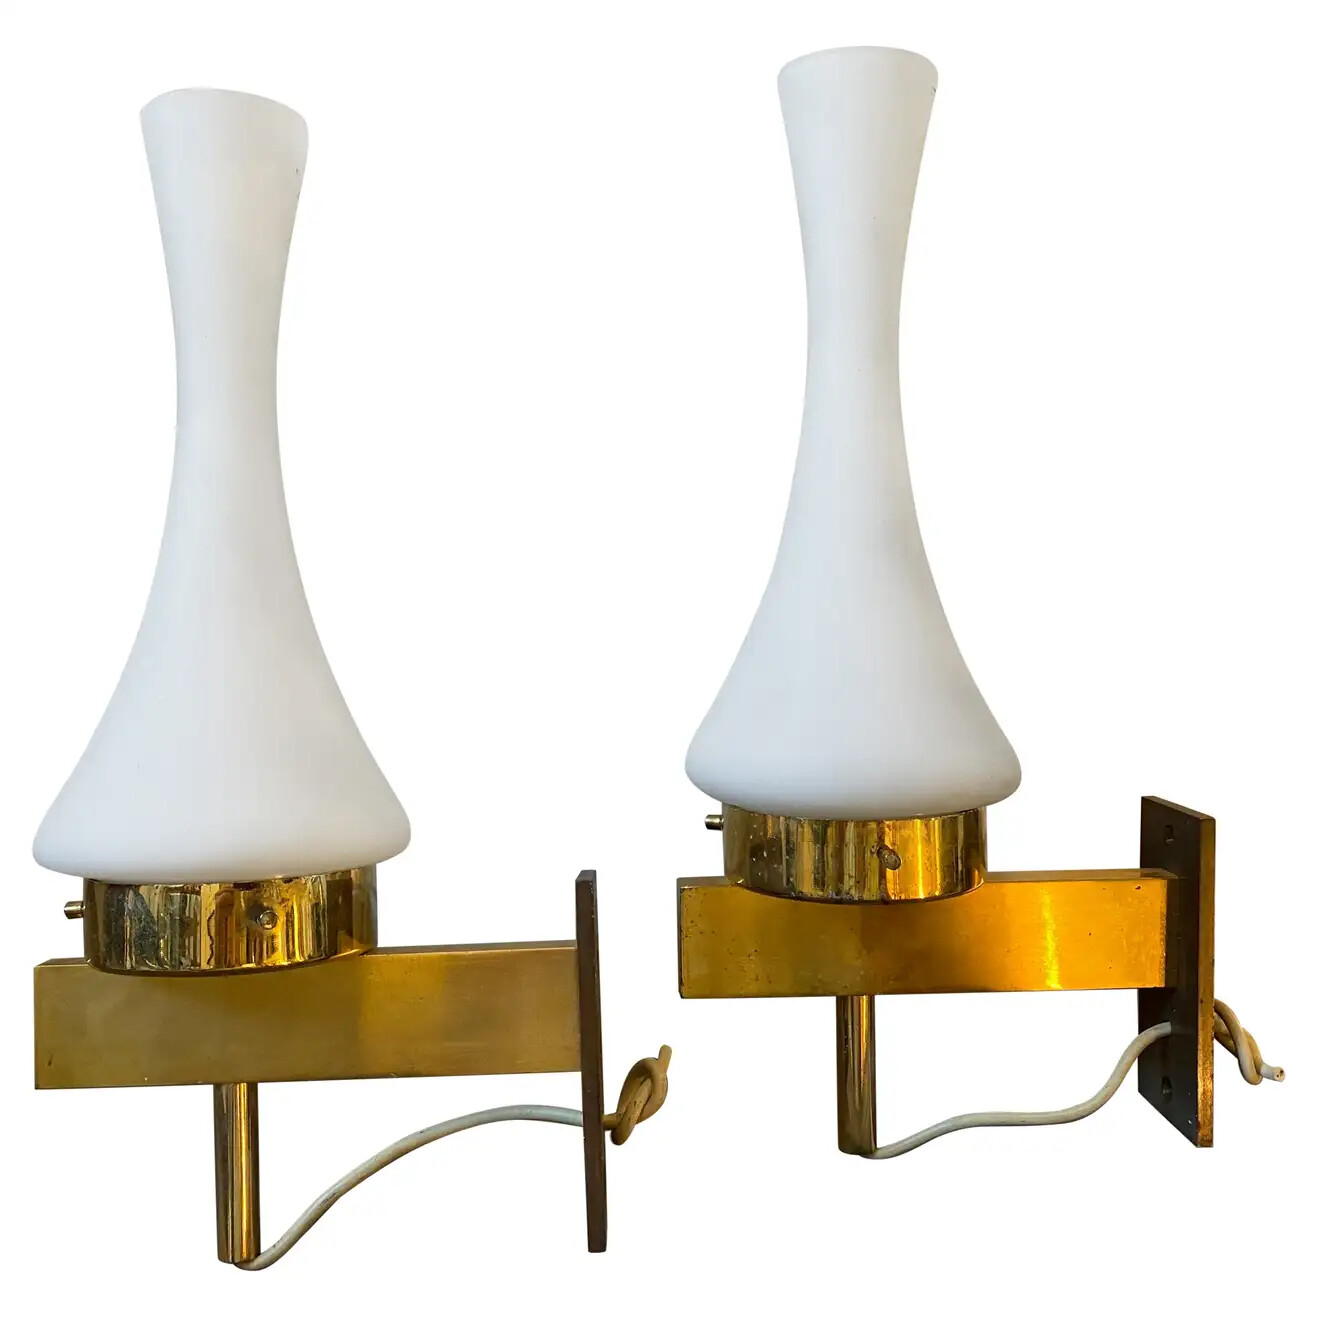 1970s, Mid-Century Modern Solid Brass and Glass French Wall Sconces